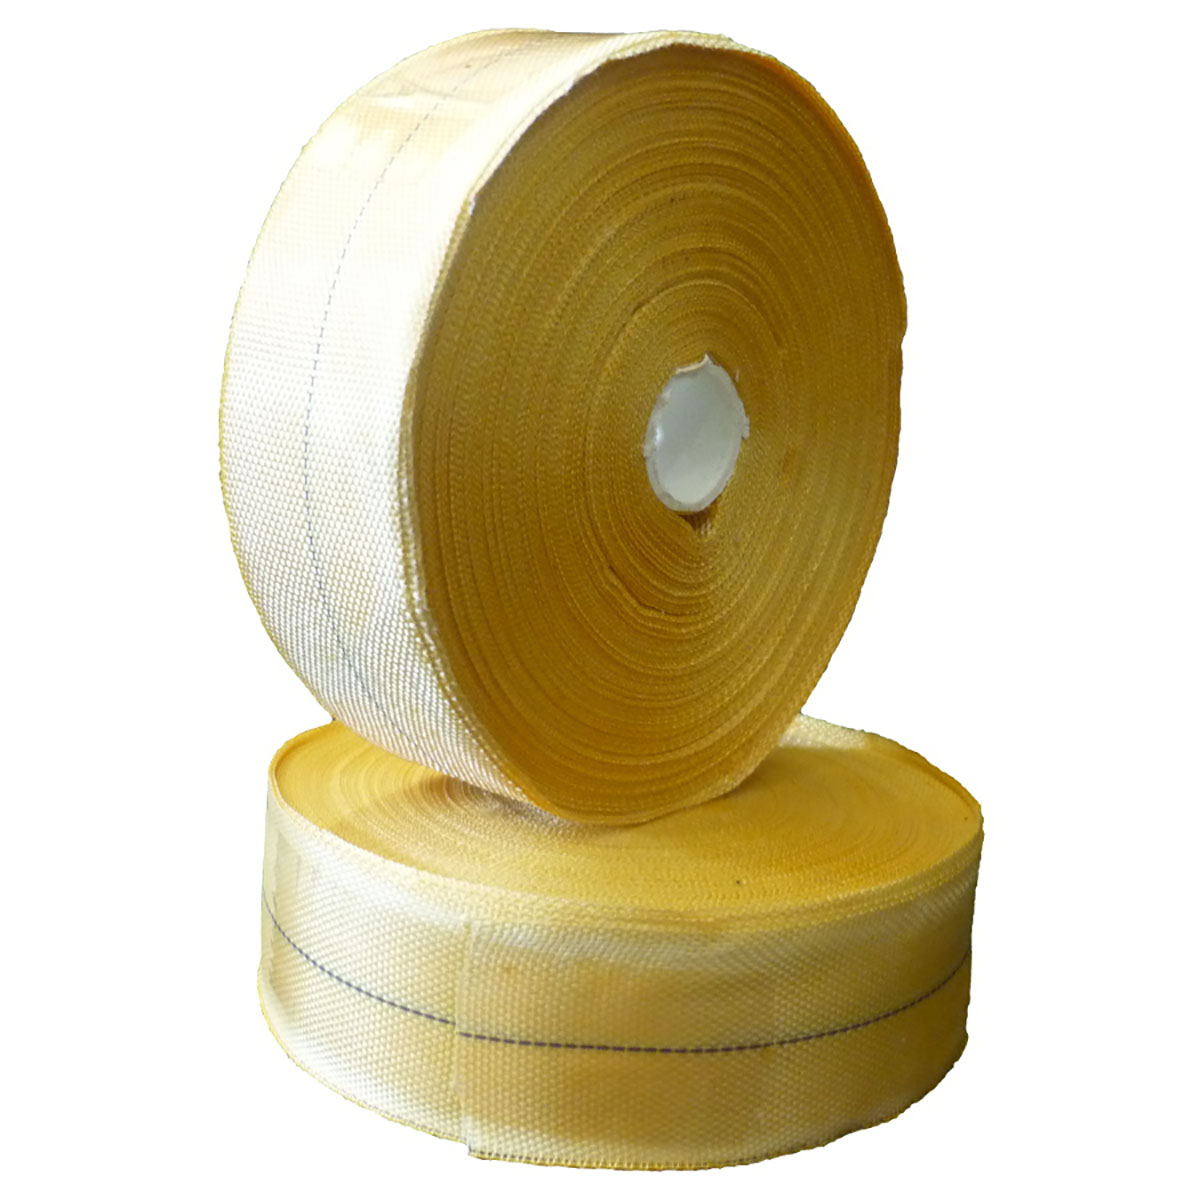 Woven Varnished Glass Electrical Tape